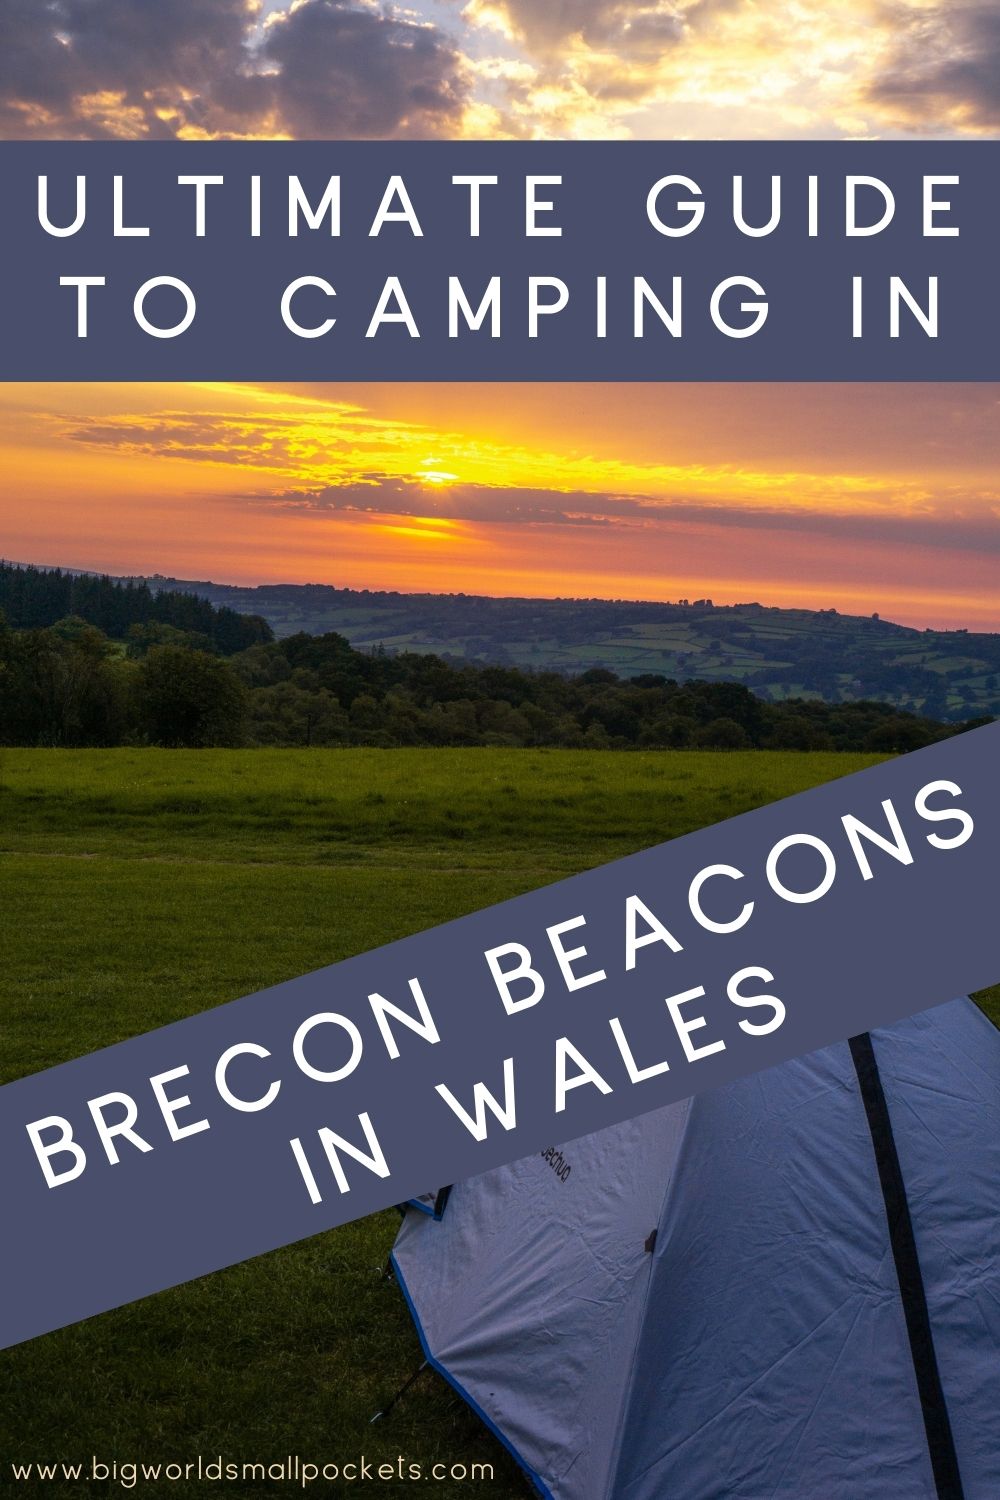 Ultimate Guide to Camping in the Brecon Beacons, Wales